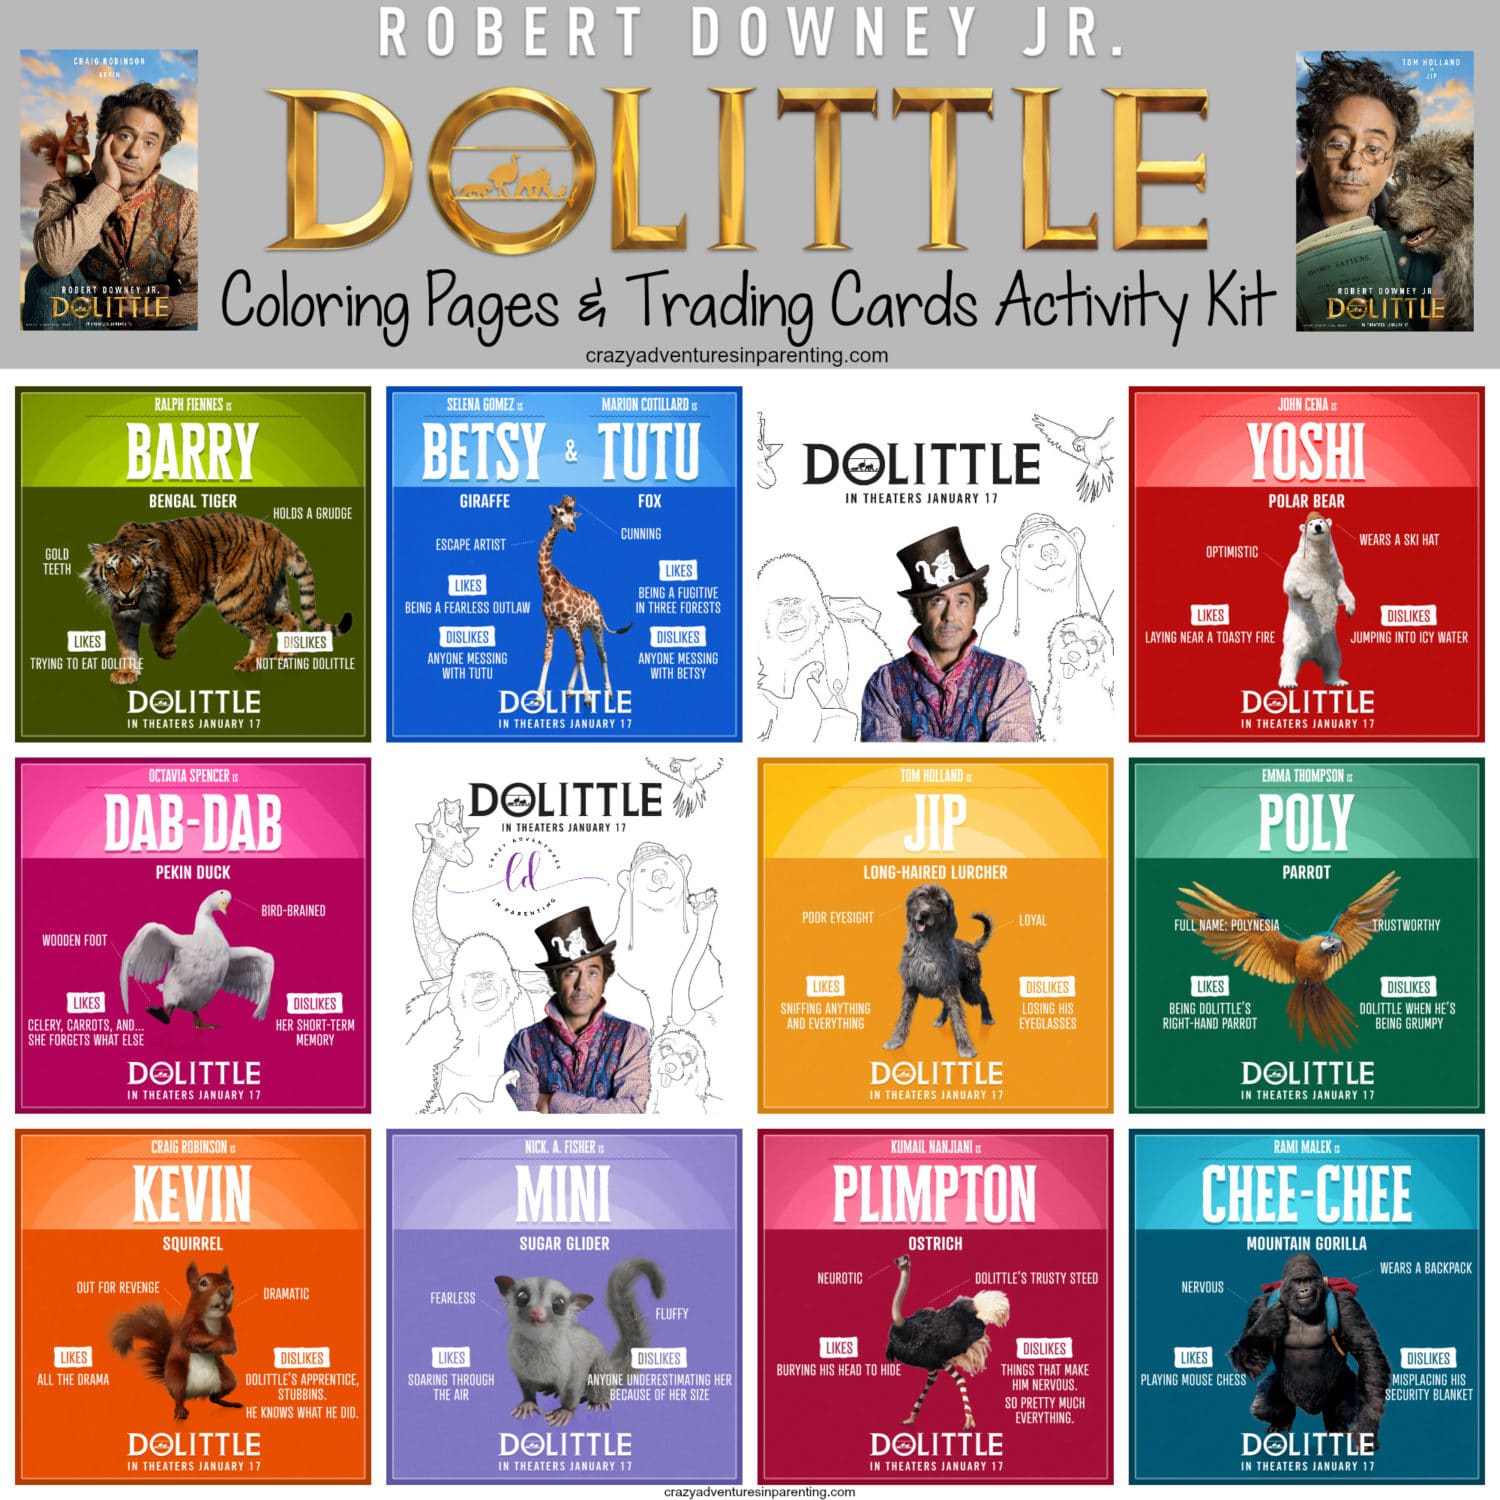 Dolittle Coloring Pages and Trading Cards Activity Kit